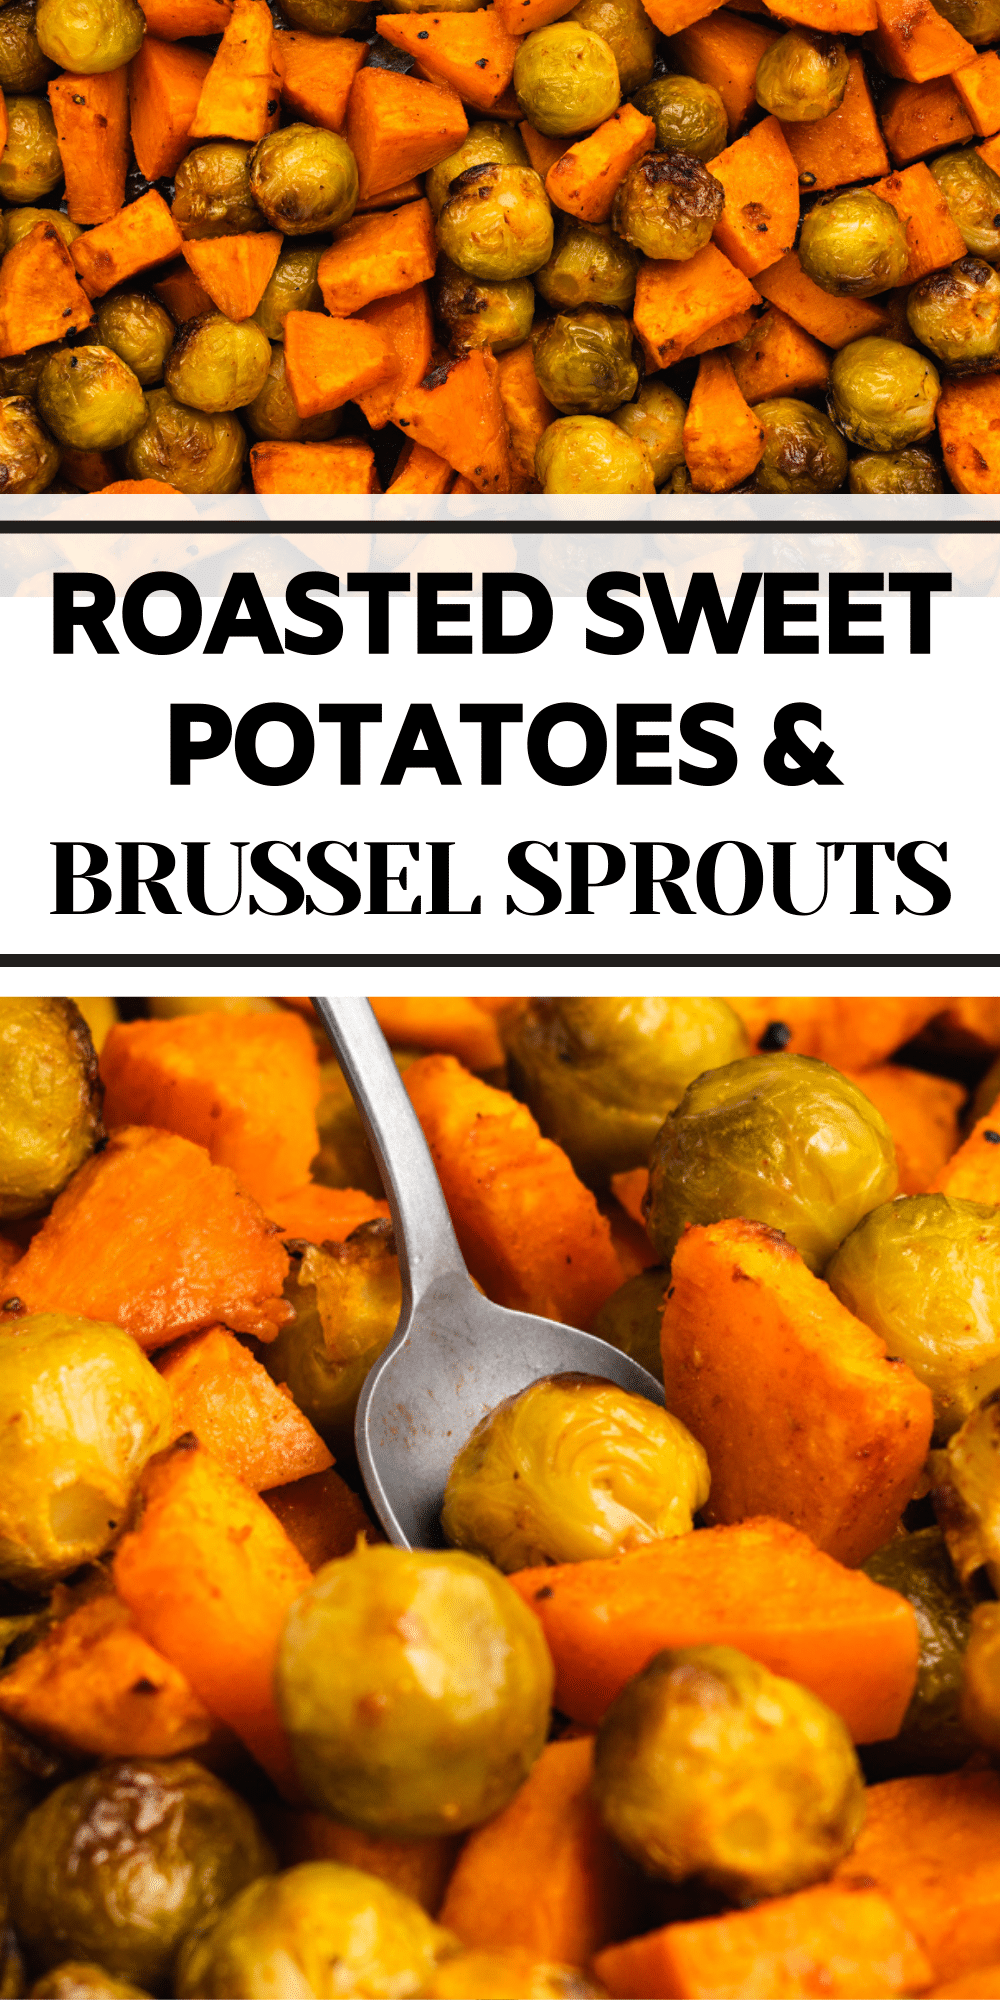 Roasted sprouts and sweet potatoes in the top half of a vertical image. Bottom half is the same but with a spoon being used to lift some of the food. Text overlay says roasted sweet potatoes and brussel sprouts